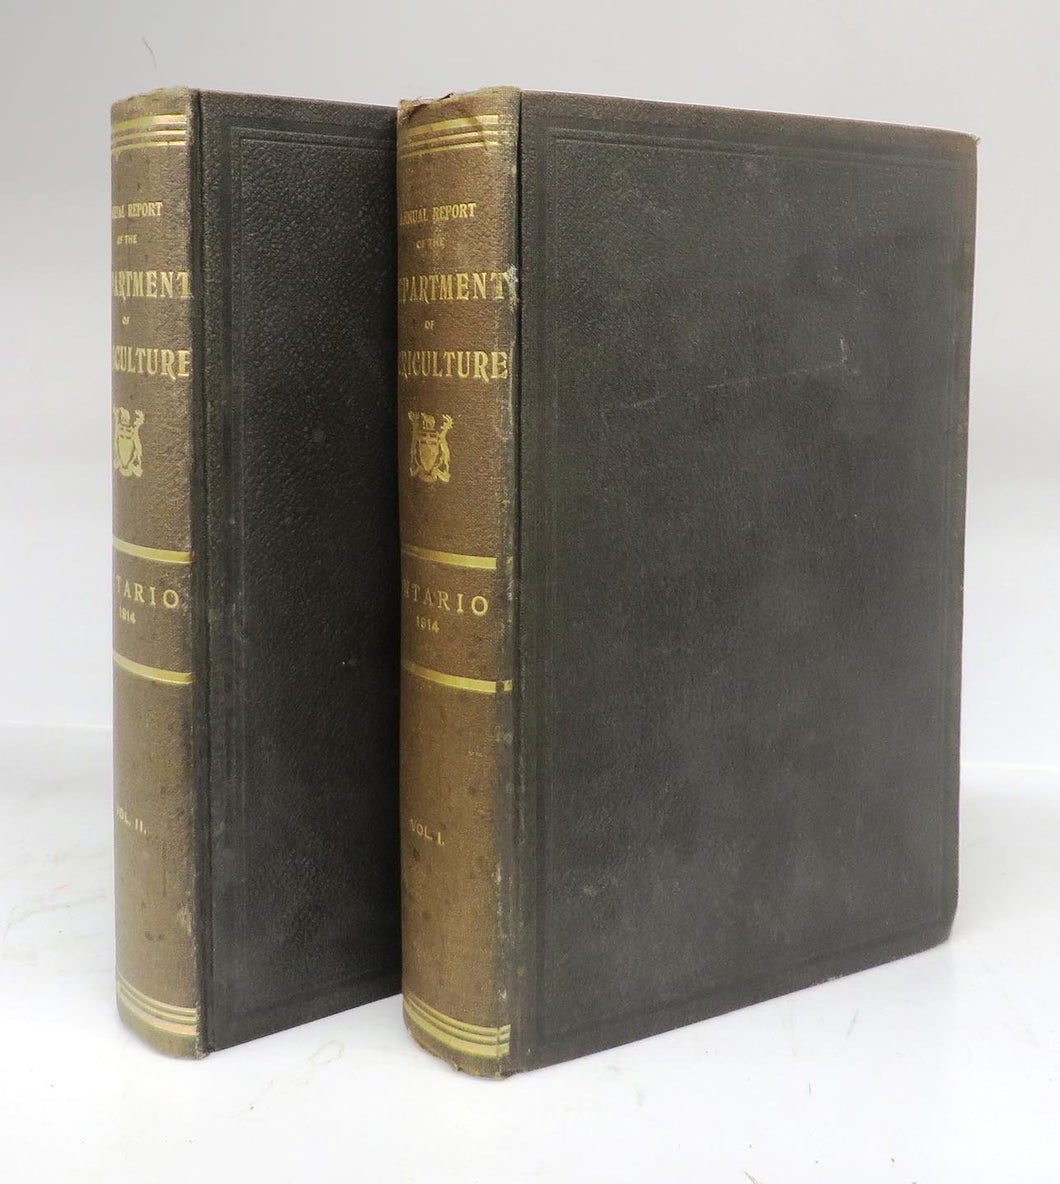 Annual Report of the Department of Agriculture of the Province of Ontario 1914. Vols. I & II